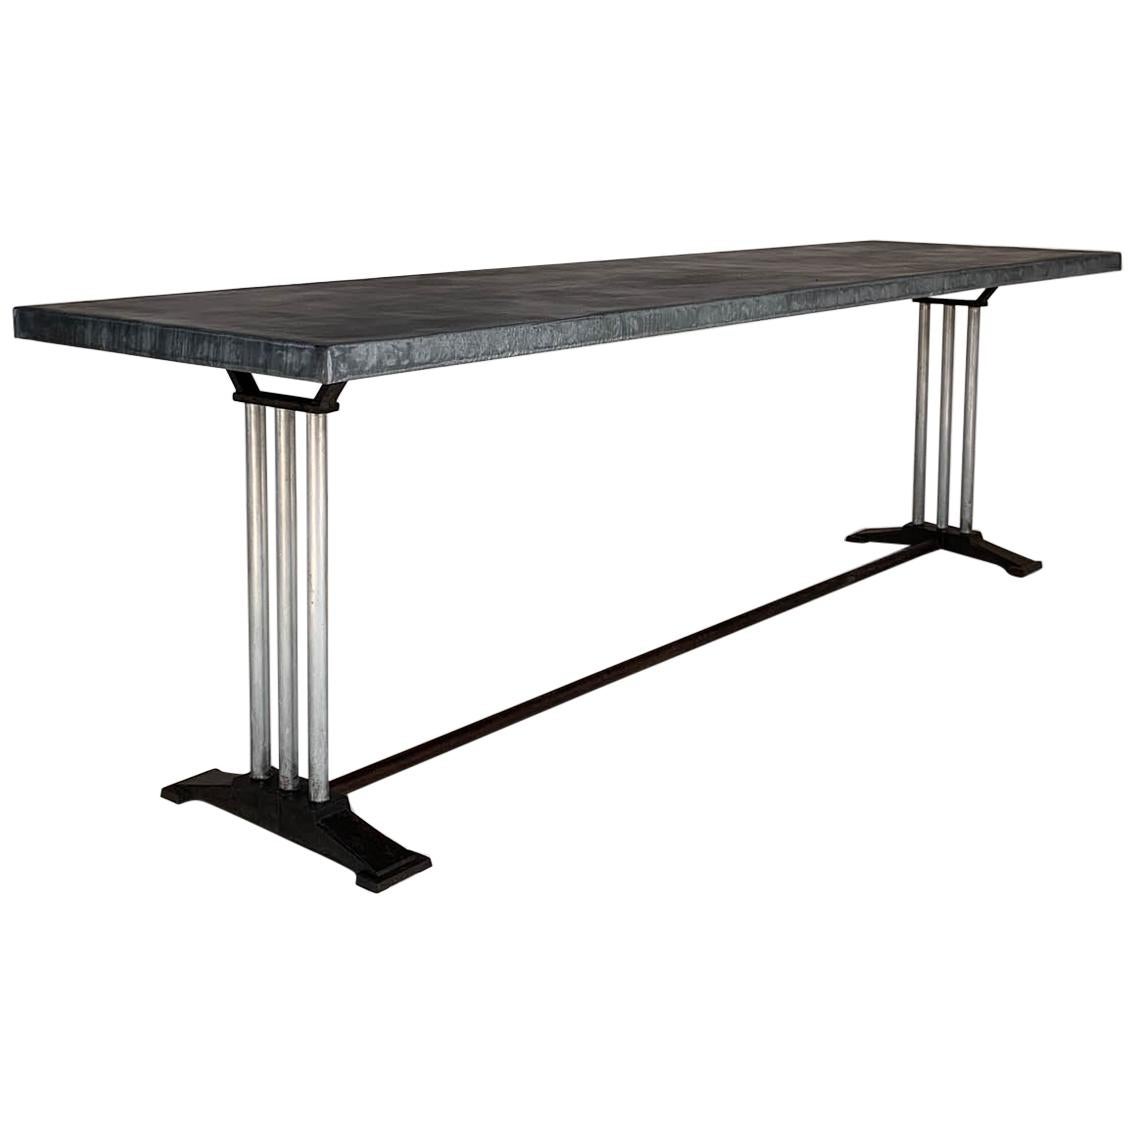 Mid-20th Century Art Deco French Restaurant Zinc Dining Table